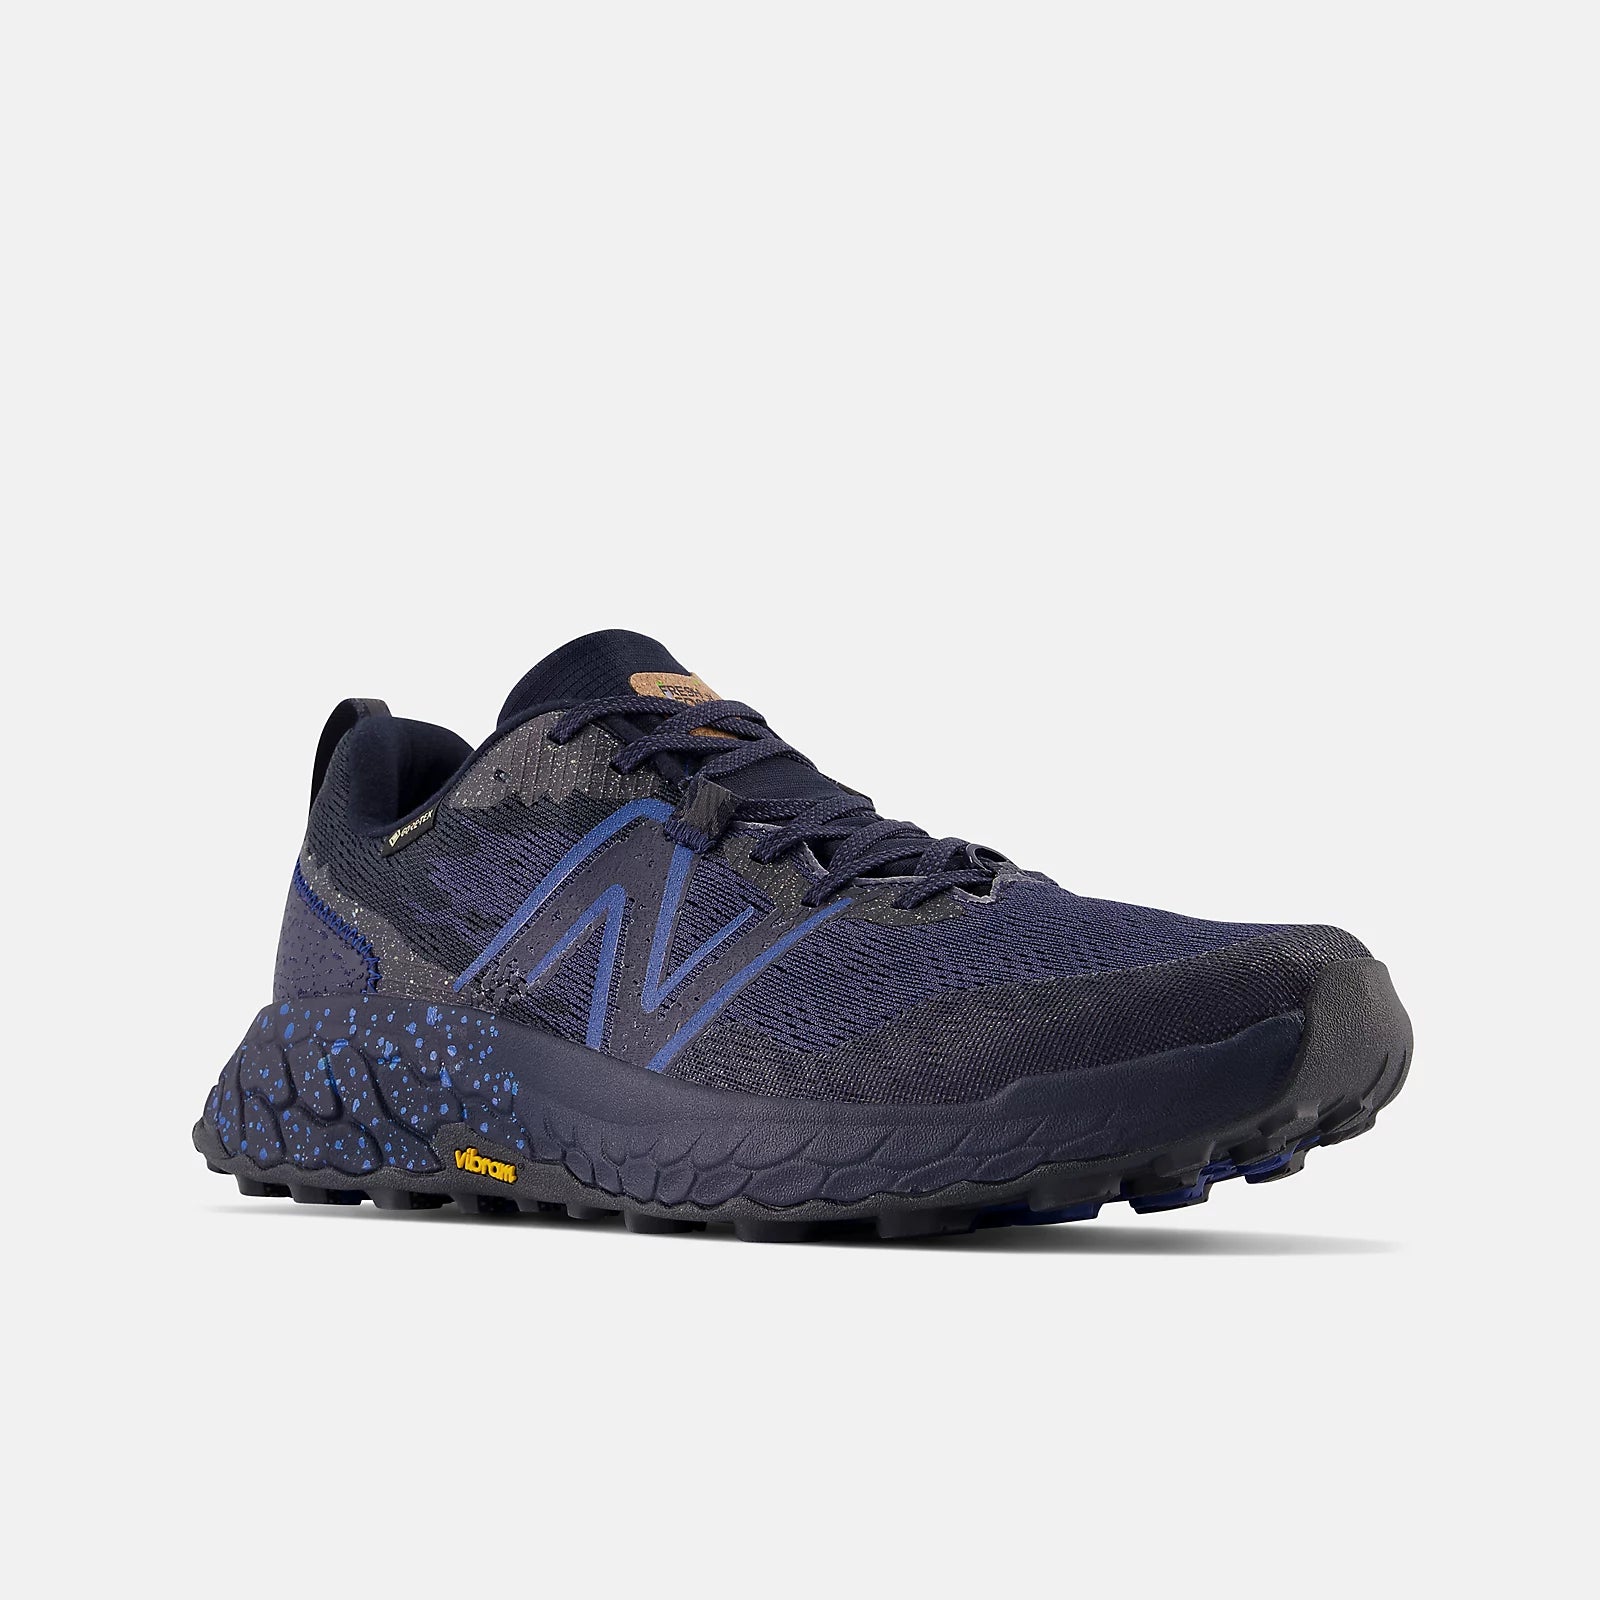 Front angled view of the Men's Hierro V7 Gortex trail runner by New Balance in the color Eclipse/Natural Indigo